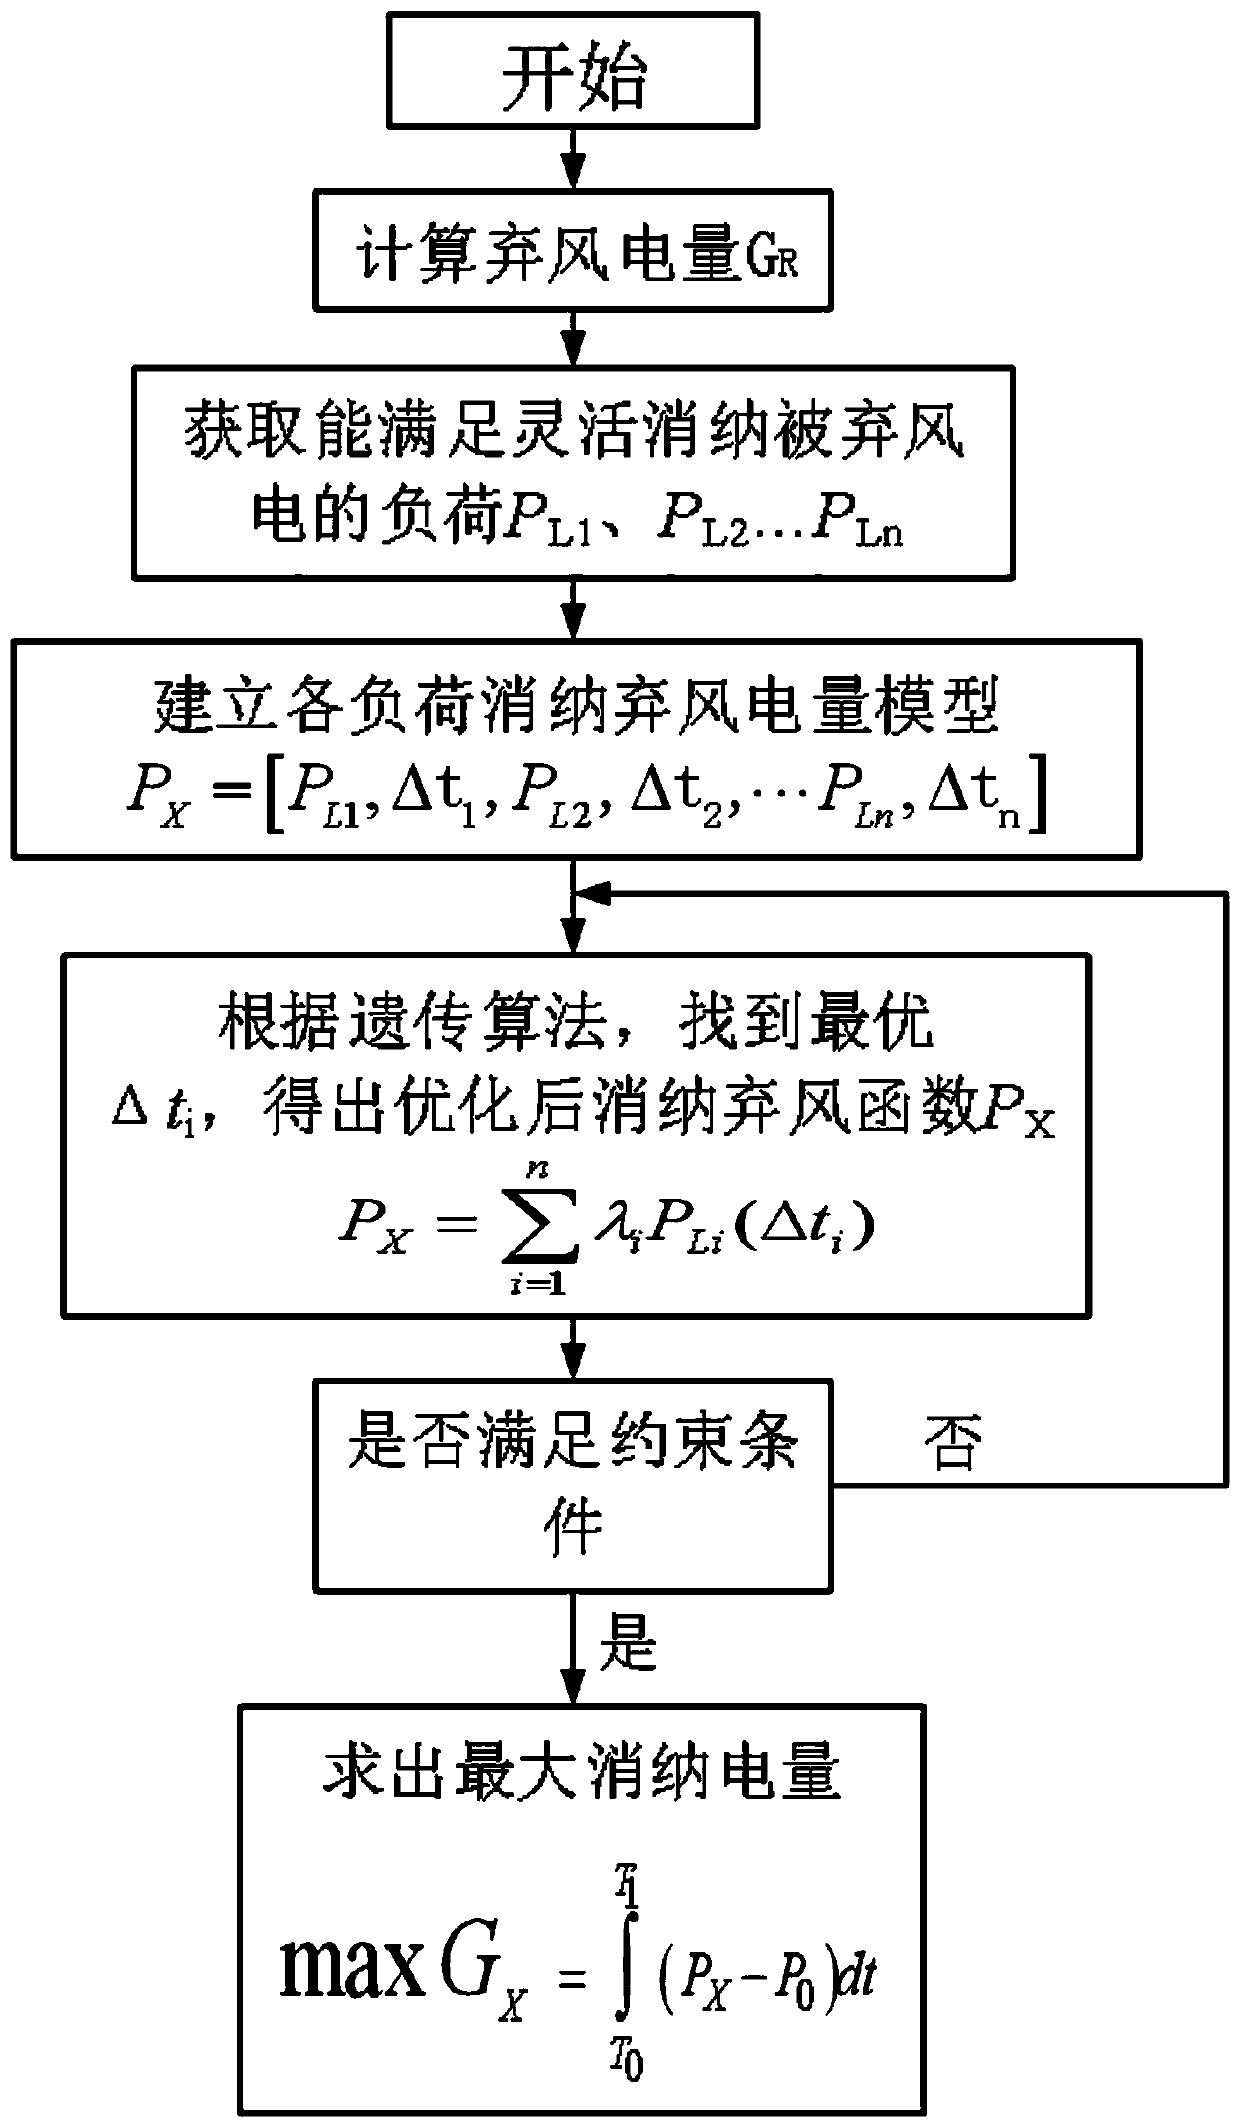 Market trading method based on flexible consumption of abandoned wind power at load side